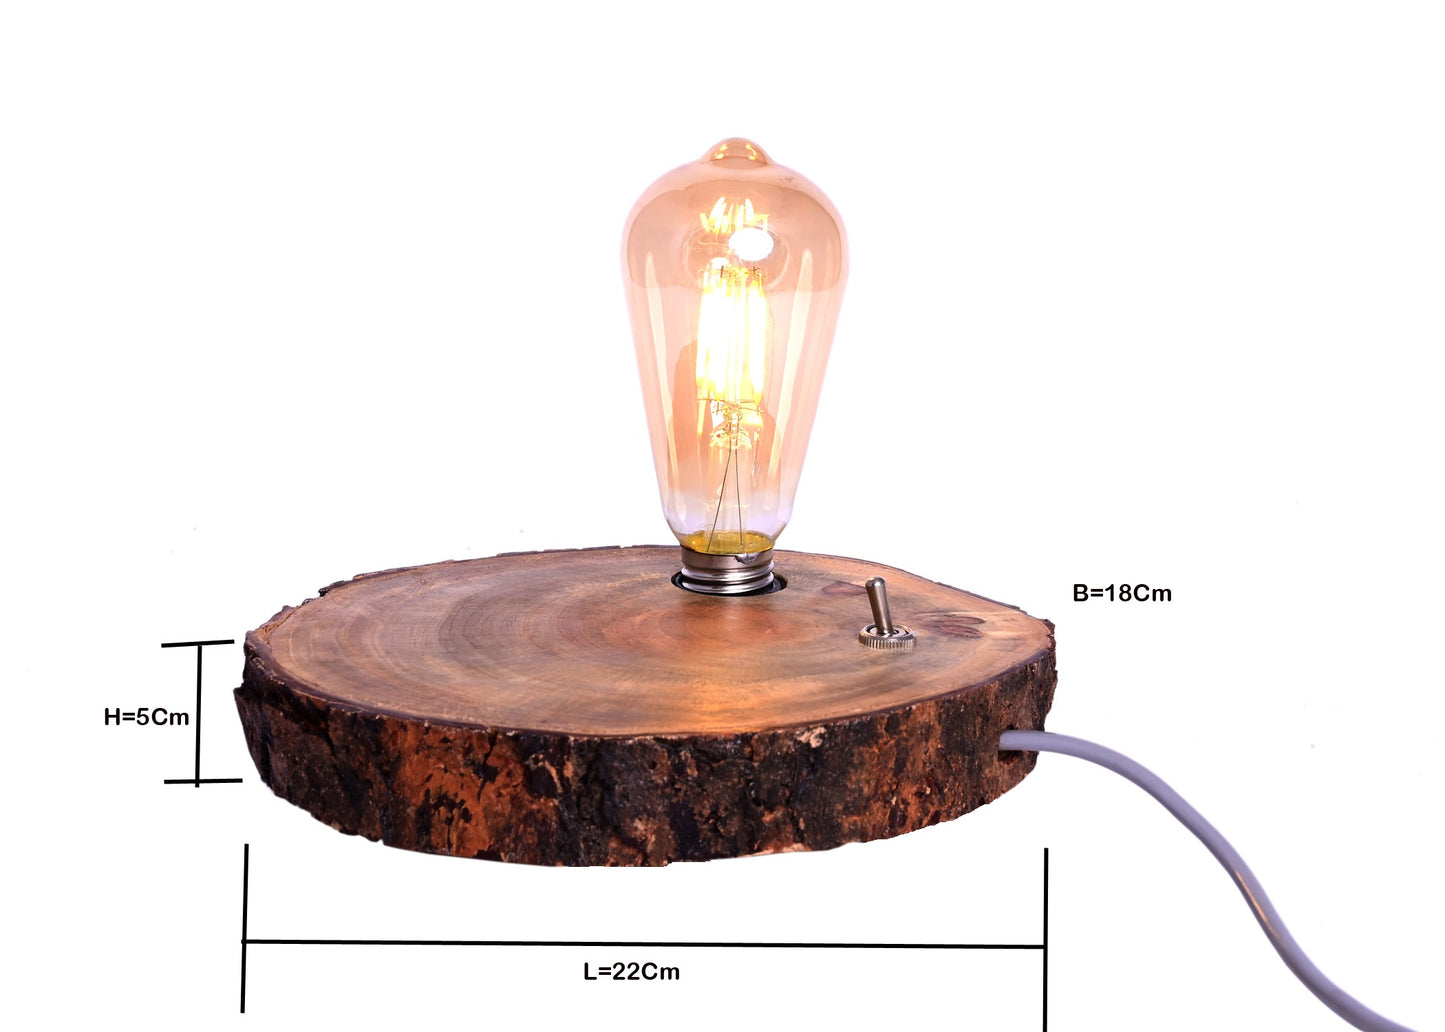 The Weaver's Nest  Rustic Wooden log Table Lamp for Home, Living Room, Study Room, Offices, Hotels, and Restaurants (Brown, 22 X 18 X 5 cm)